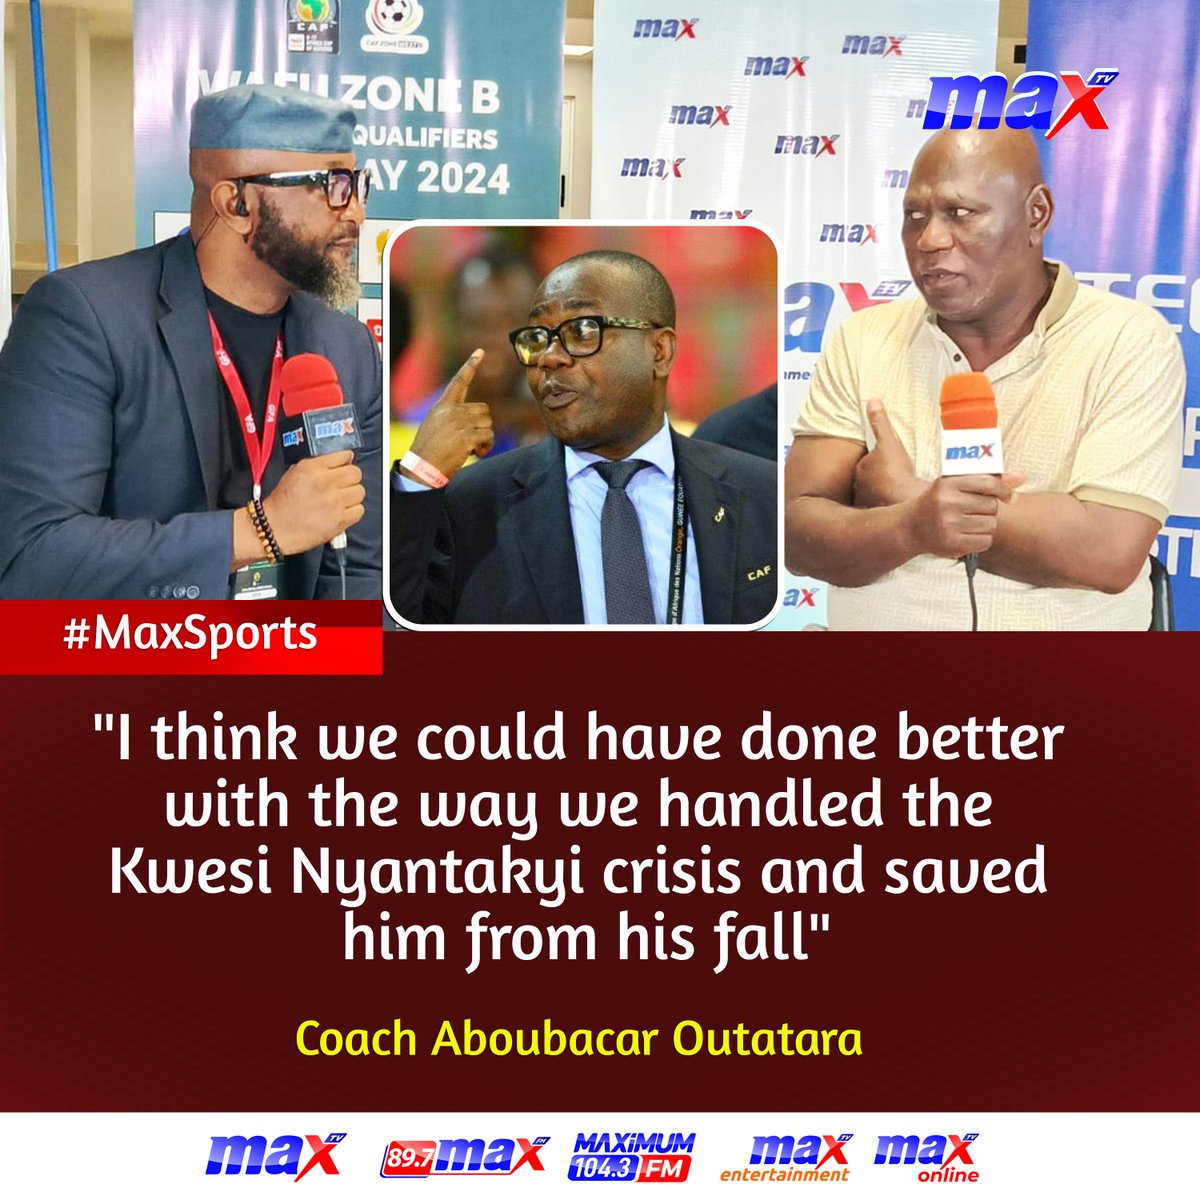 'I think we could have done better with the way we handled the Kwesi Nyantakyi crisis and saved him from his fall' - Coach Aboubacar Outatara

#MaxSports #MaxTV #KwesiNyatakyi #MaxOnline